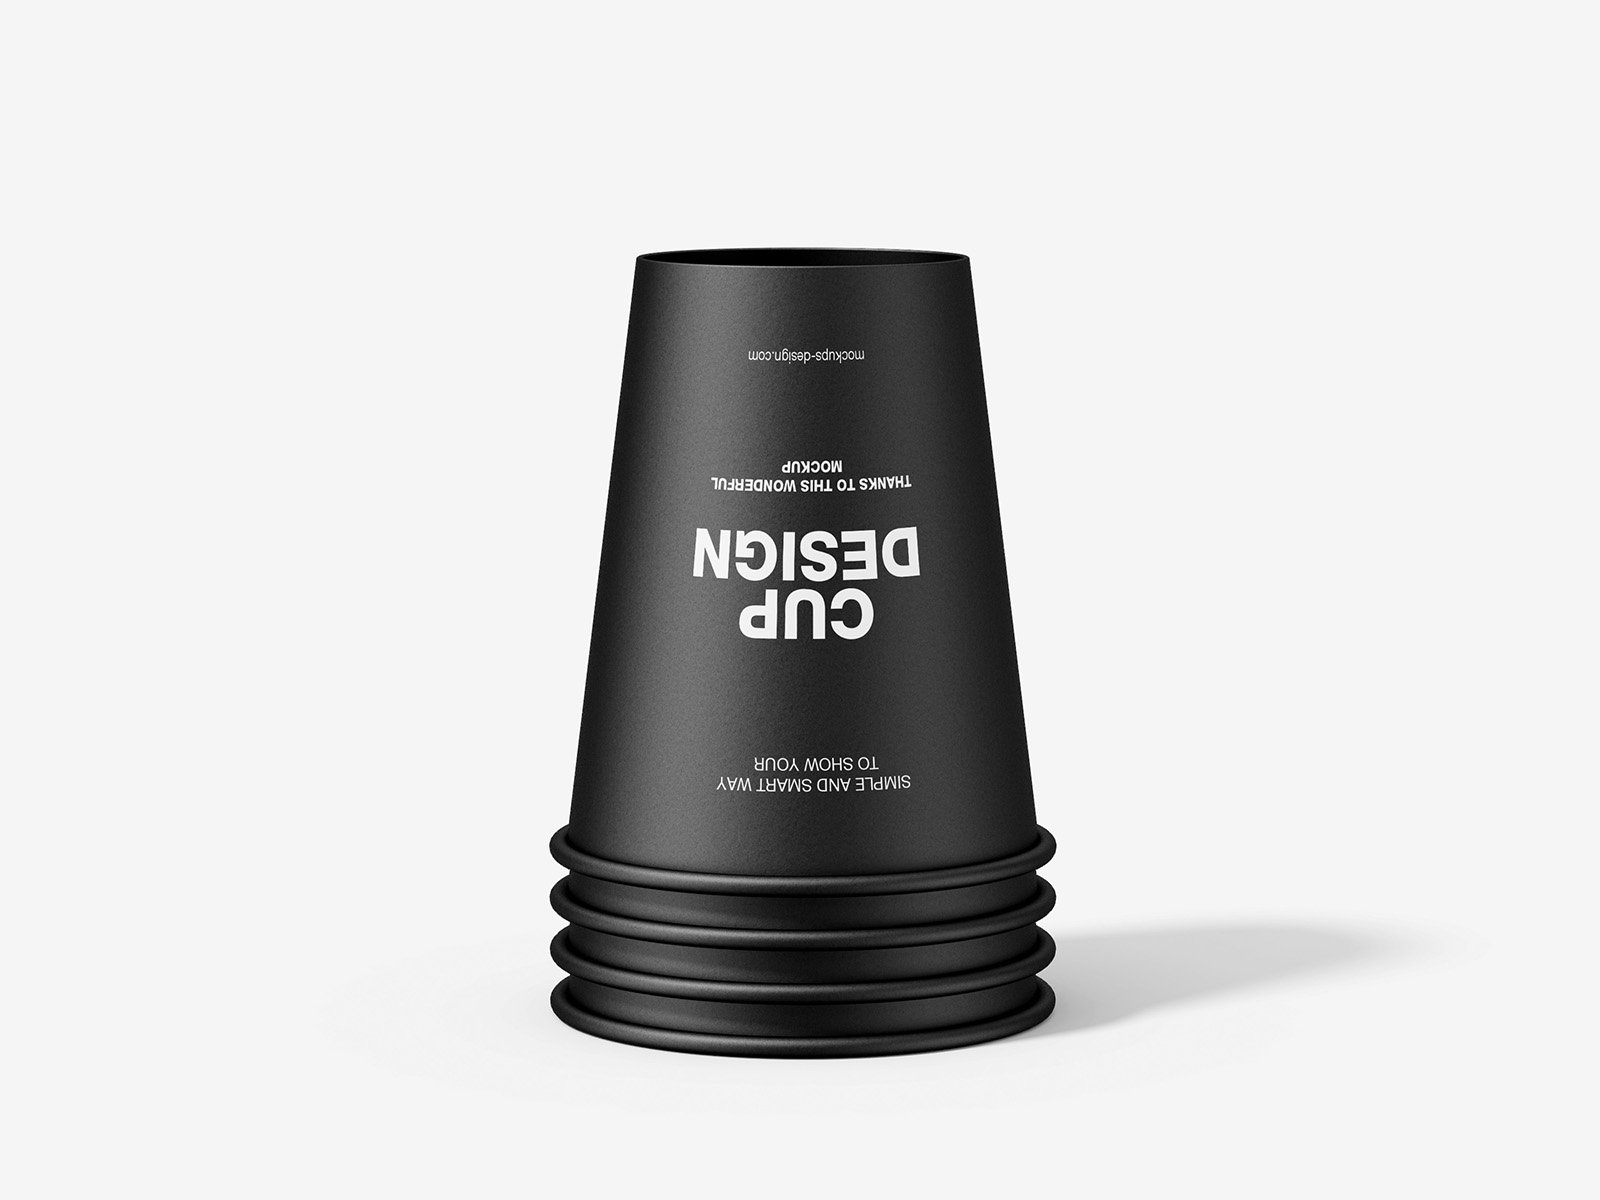 4 Stacked Paper Cups Mockup in Front View FREE PSD